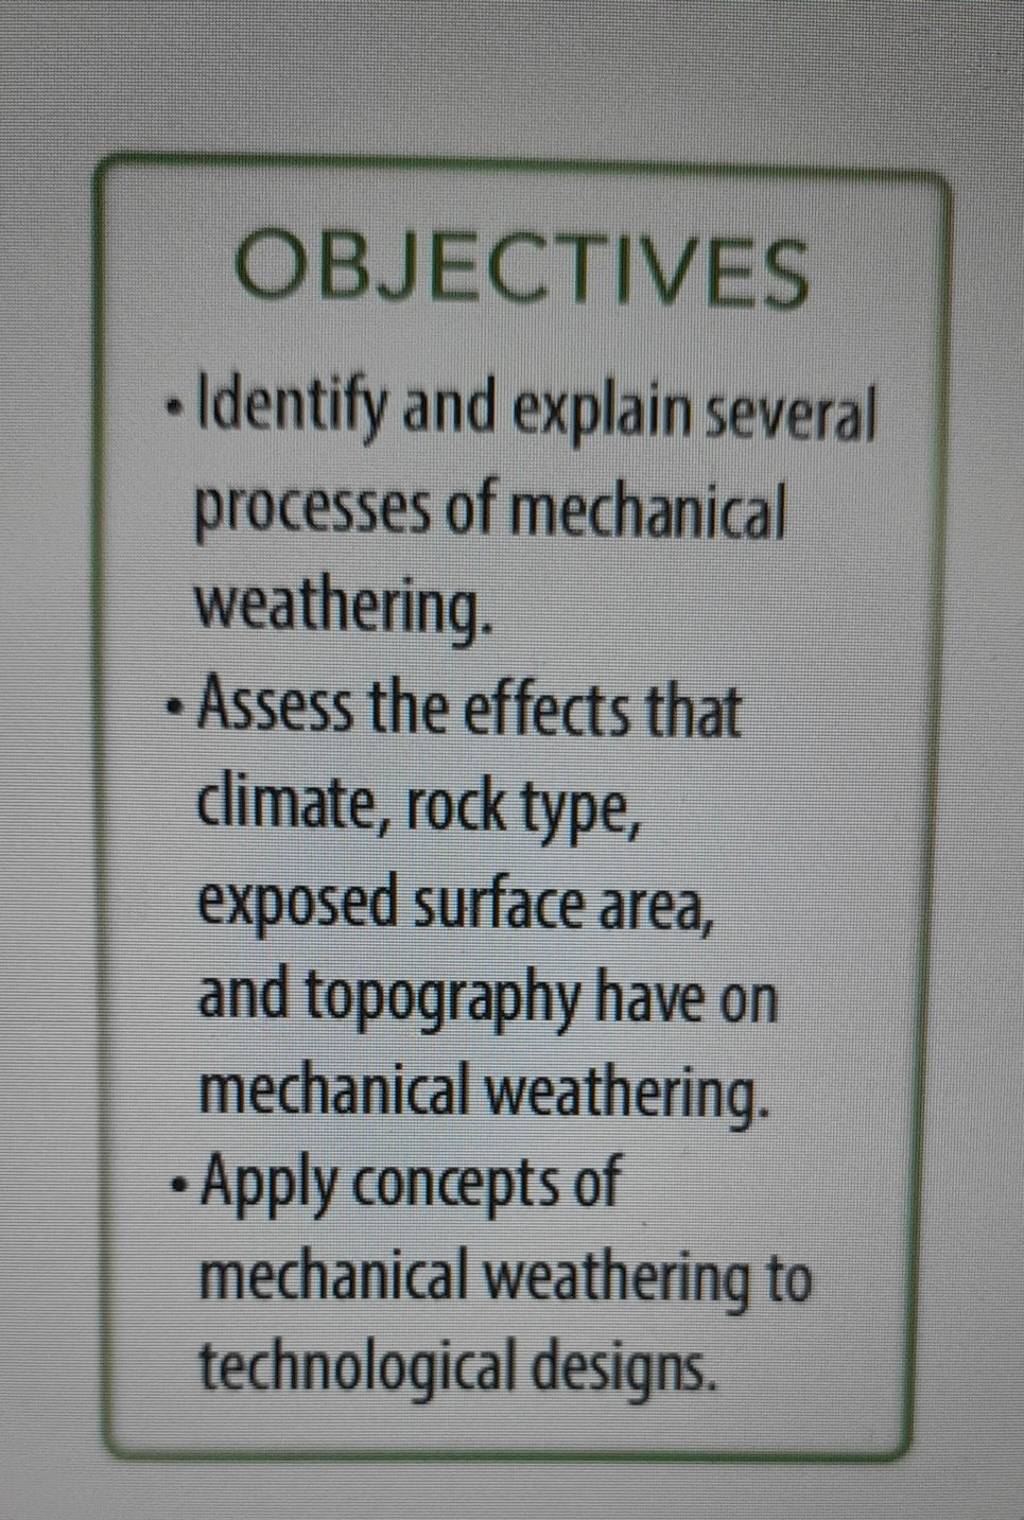 OBJECTIVES
- Identify and explain several processes of mechanical weat